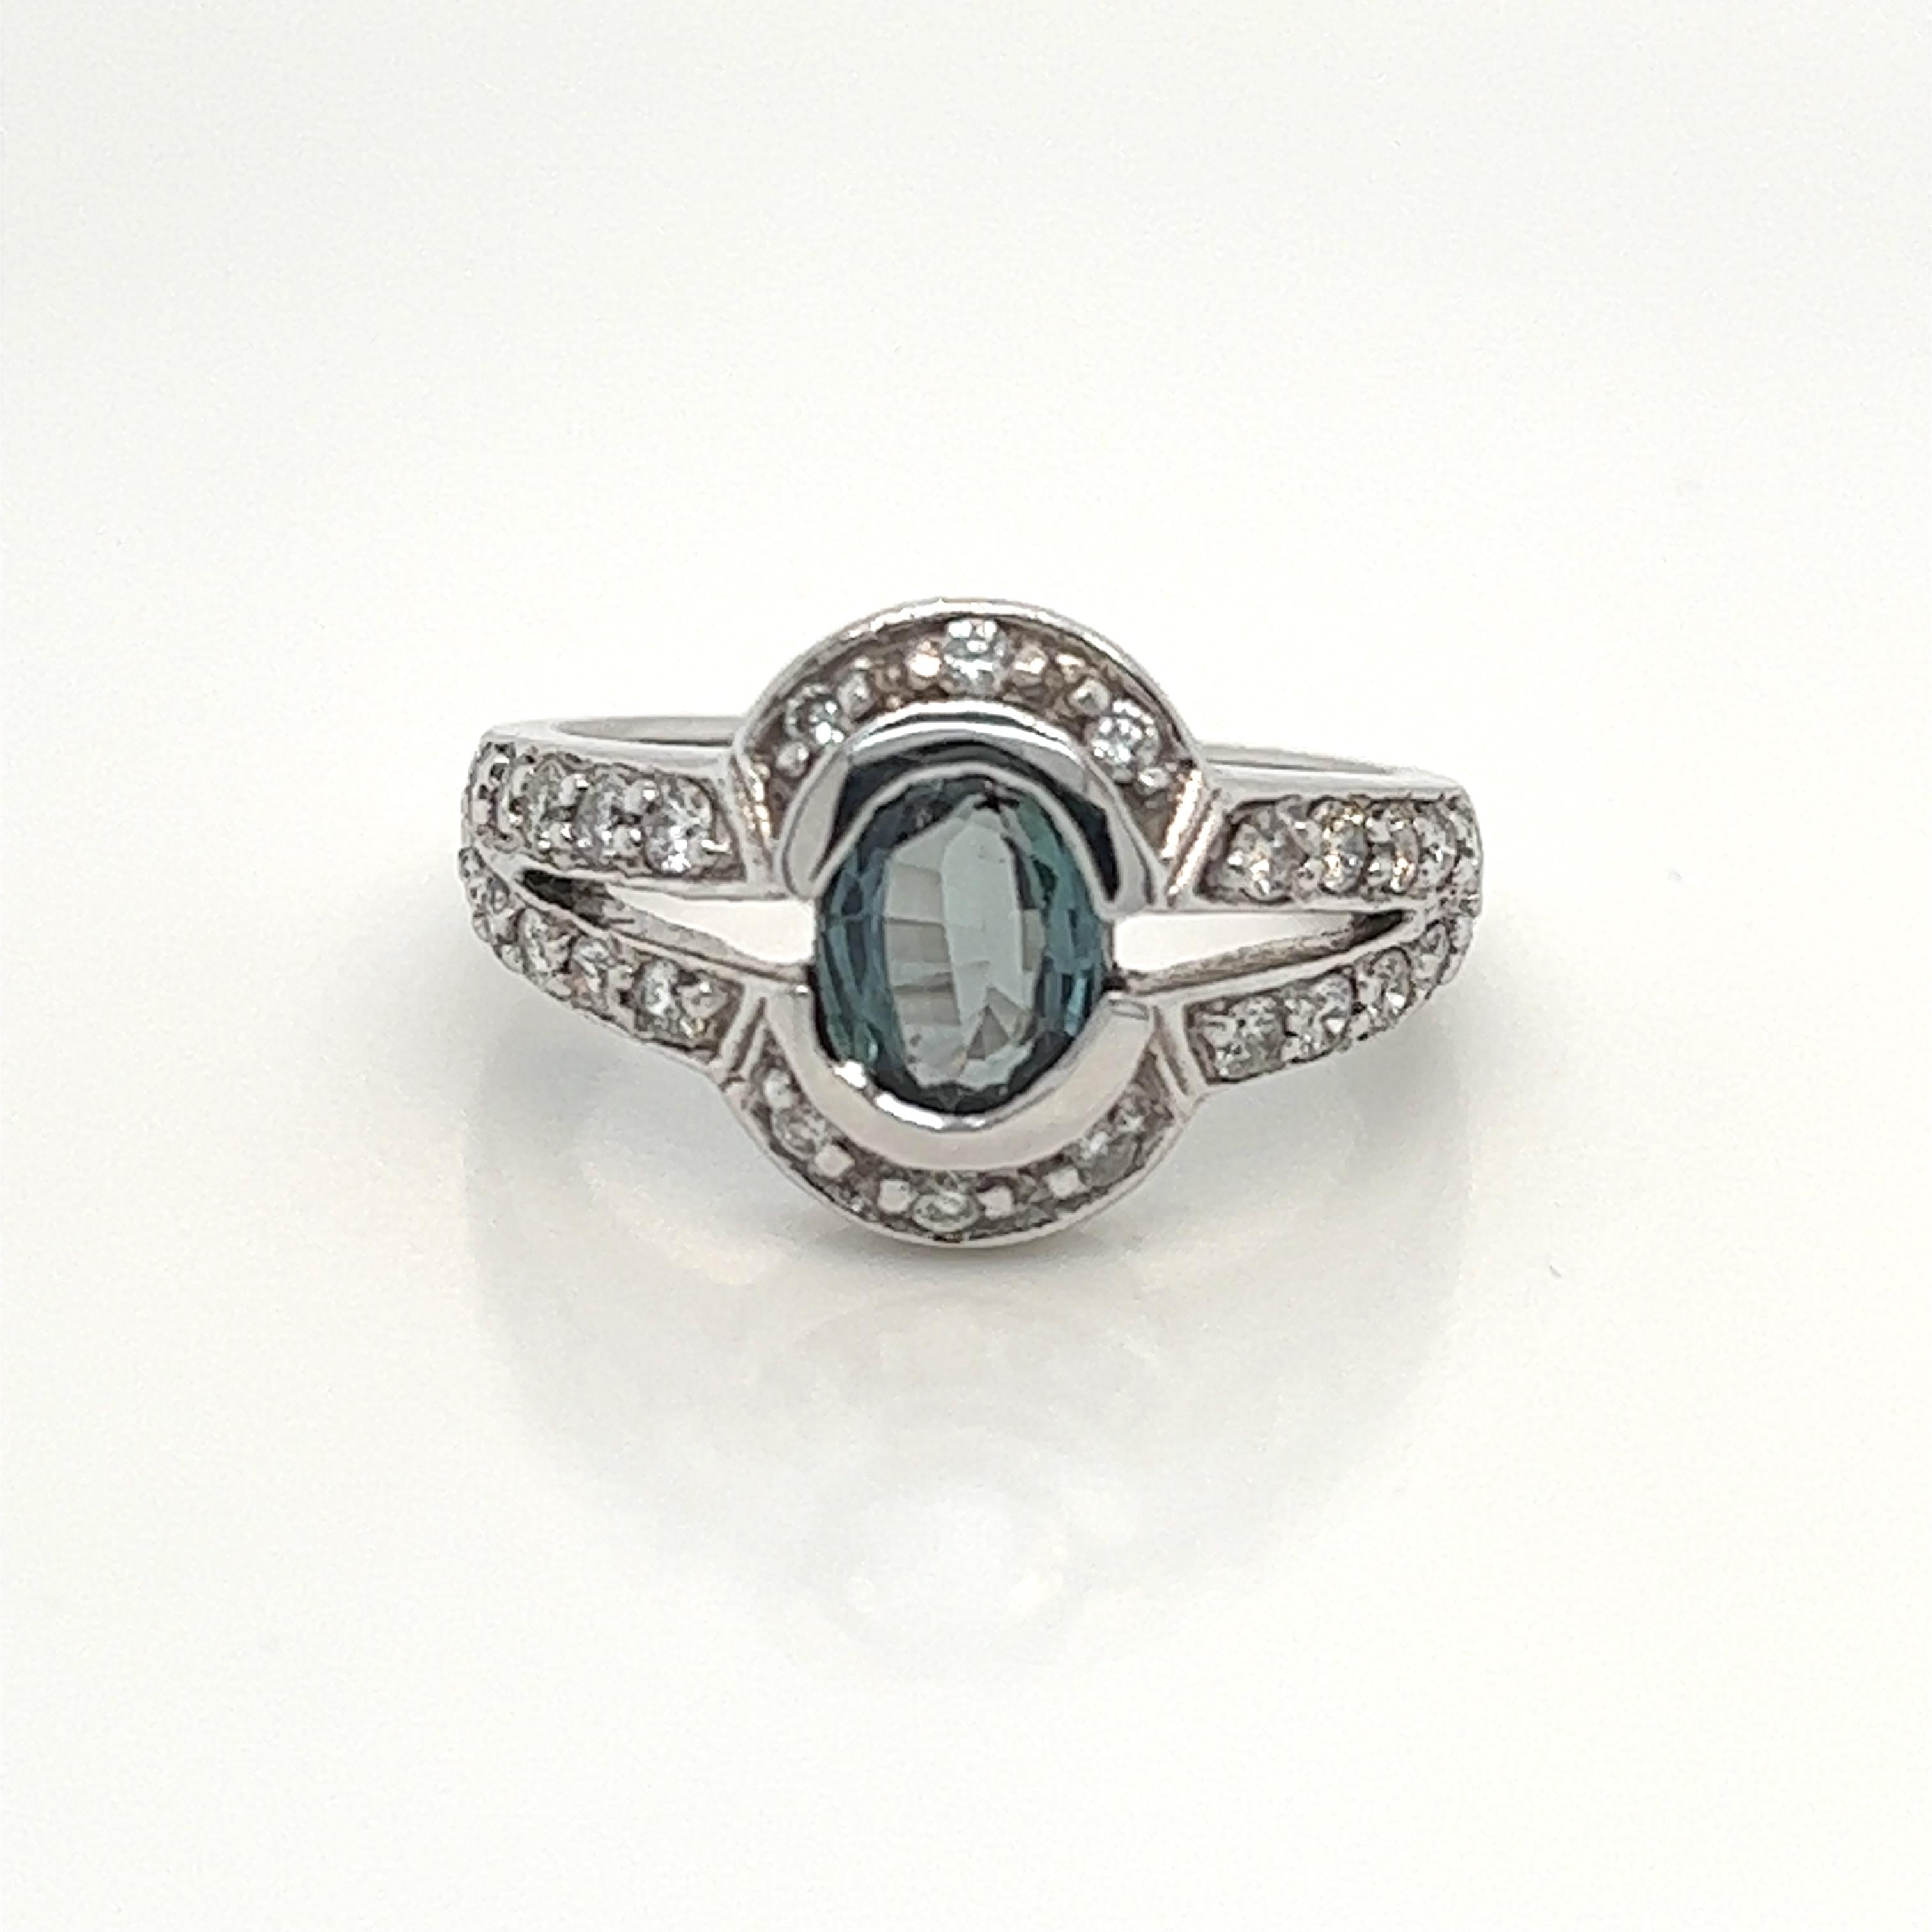 This is a gorgeous natural AAA quality Oval Alexandrite surrounded by dainty diamonds that is set in solid 18K white gold. This ring features a natural 1.40 carat cushion alexandrite that is certified by the Gemological Institute of America (GIA).